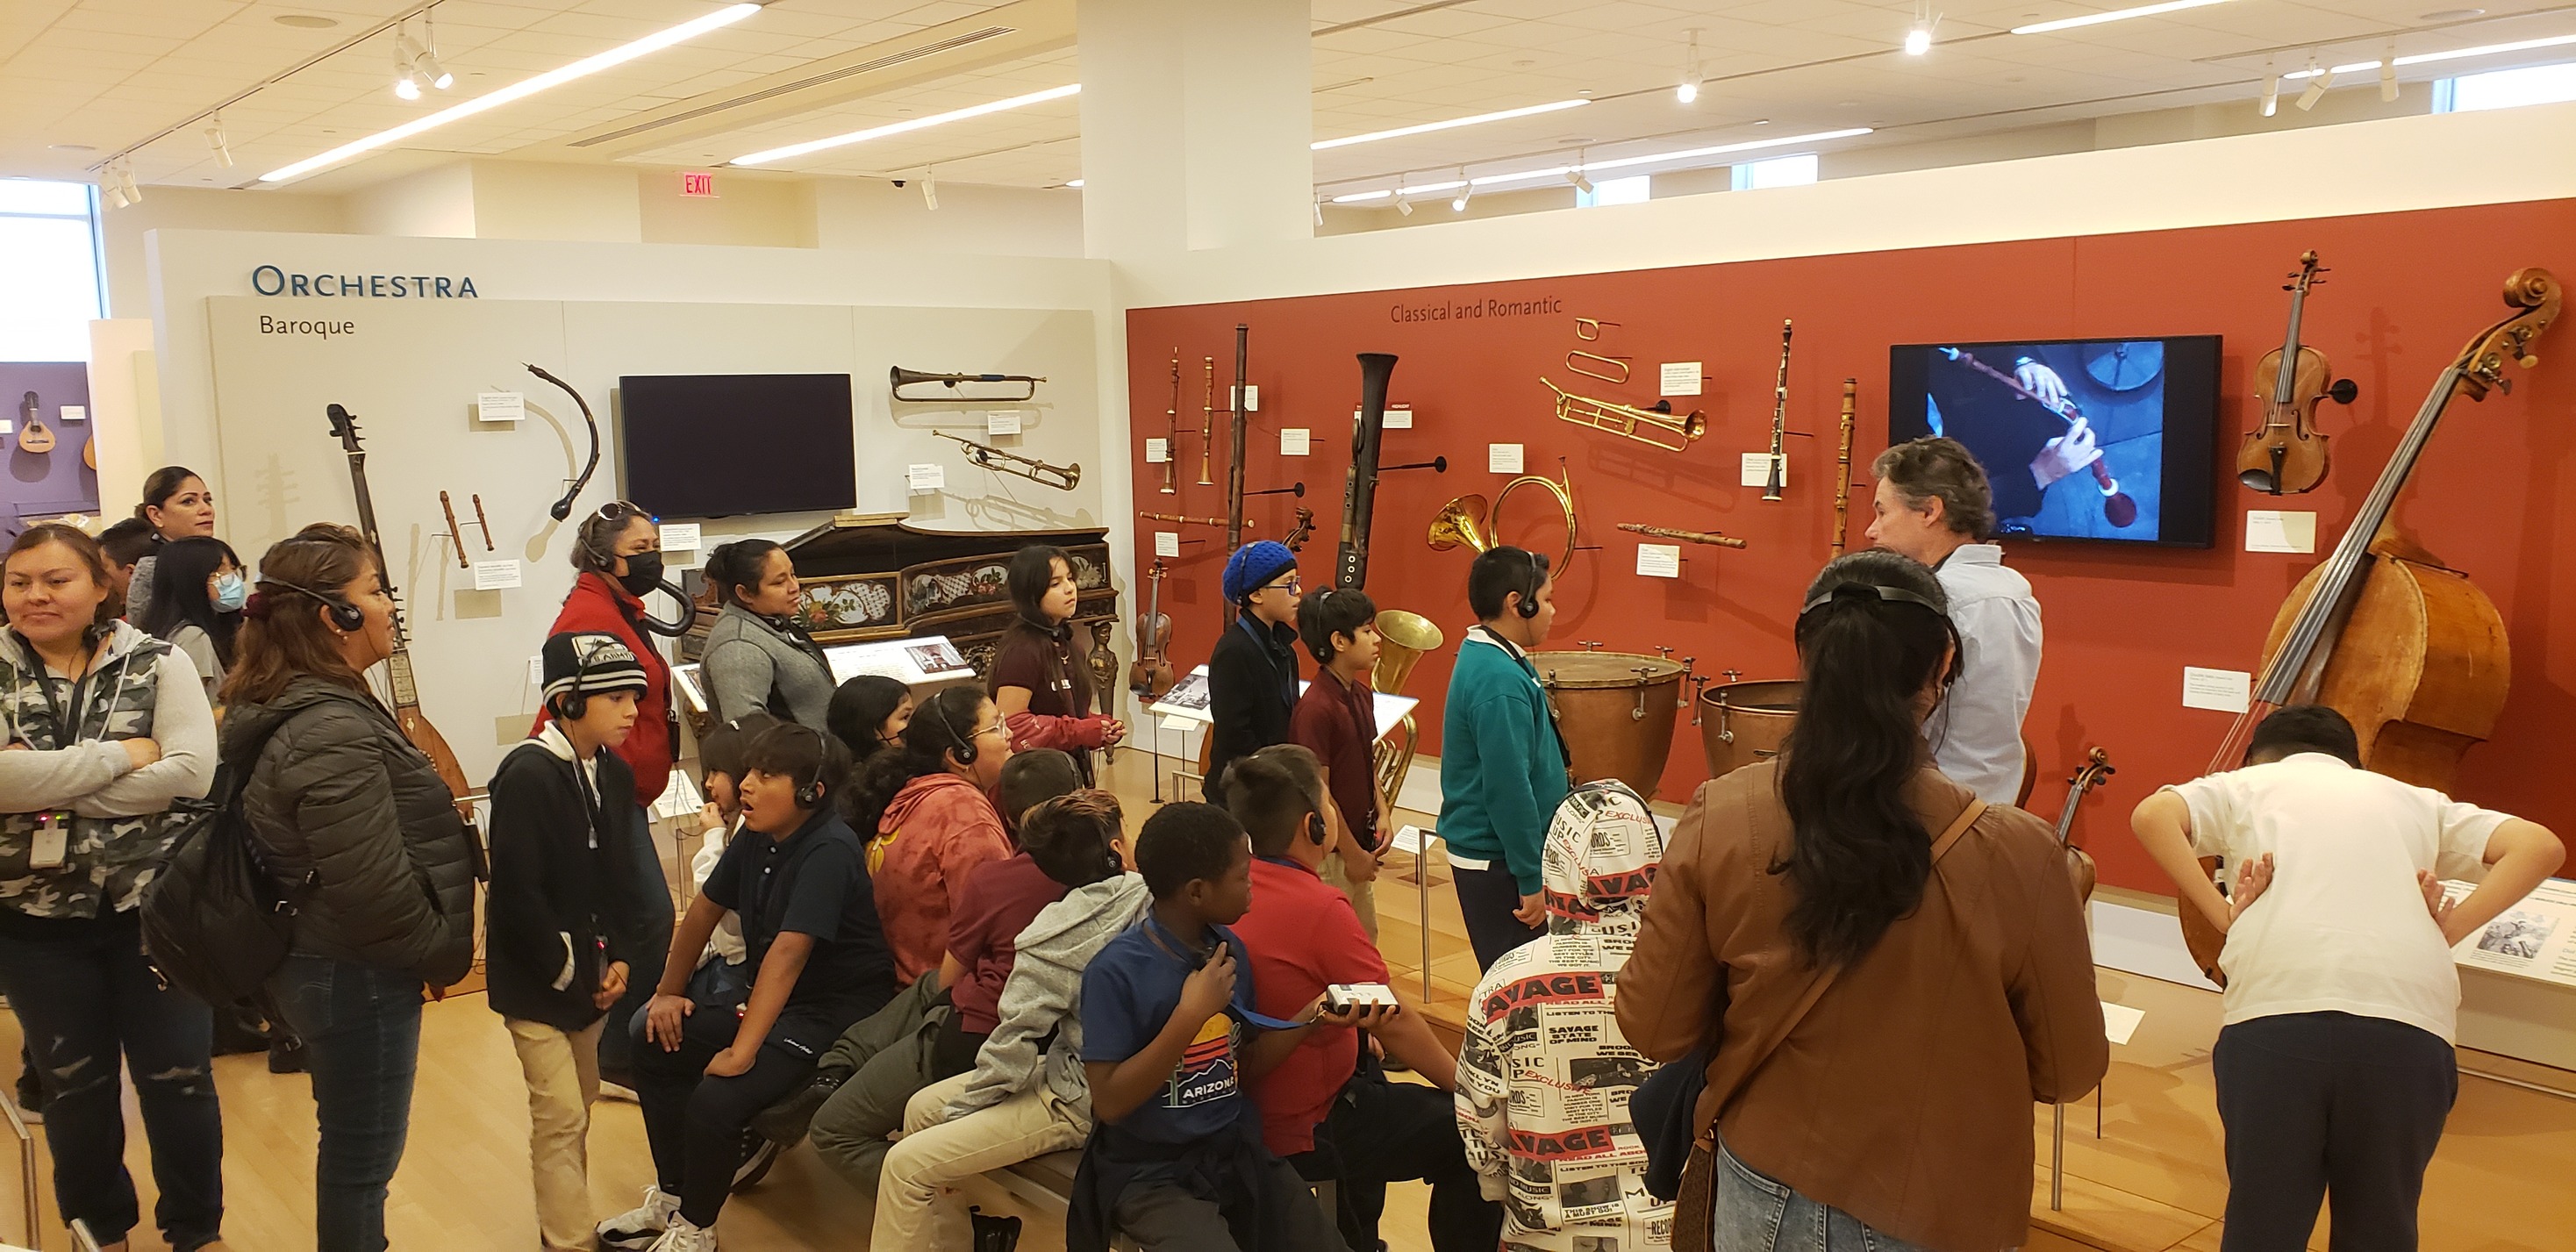 Students at the musical instrument museum.